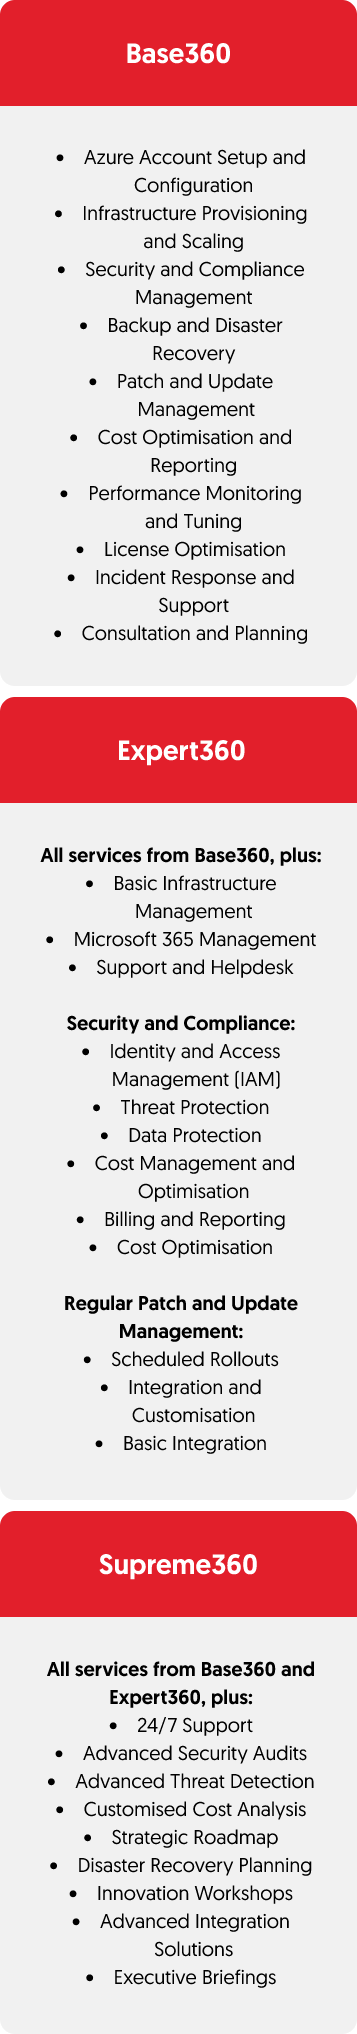 Microsoft 365 and Azure Cloud Managed Services